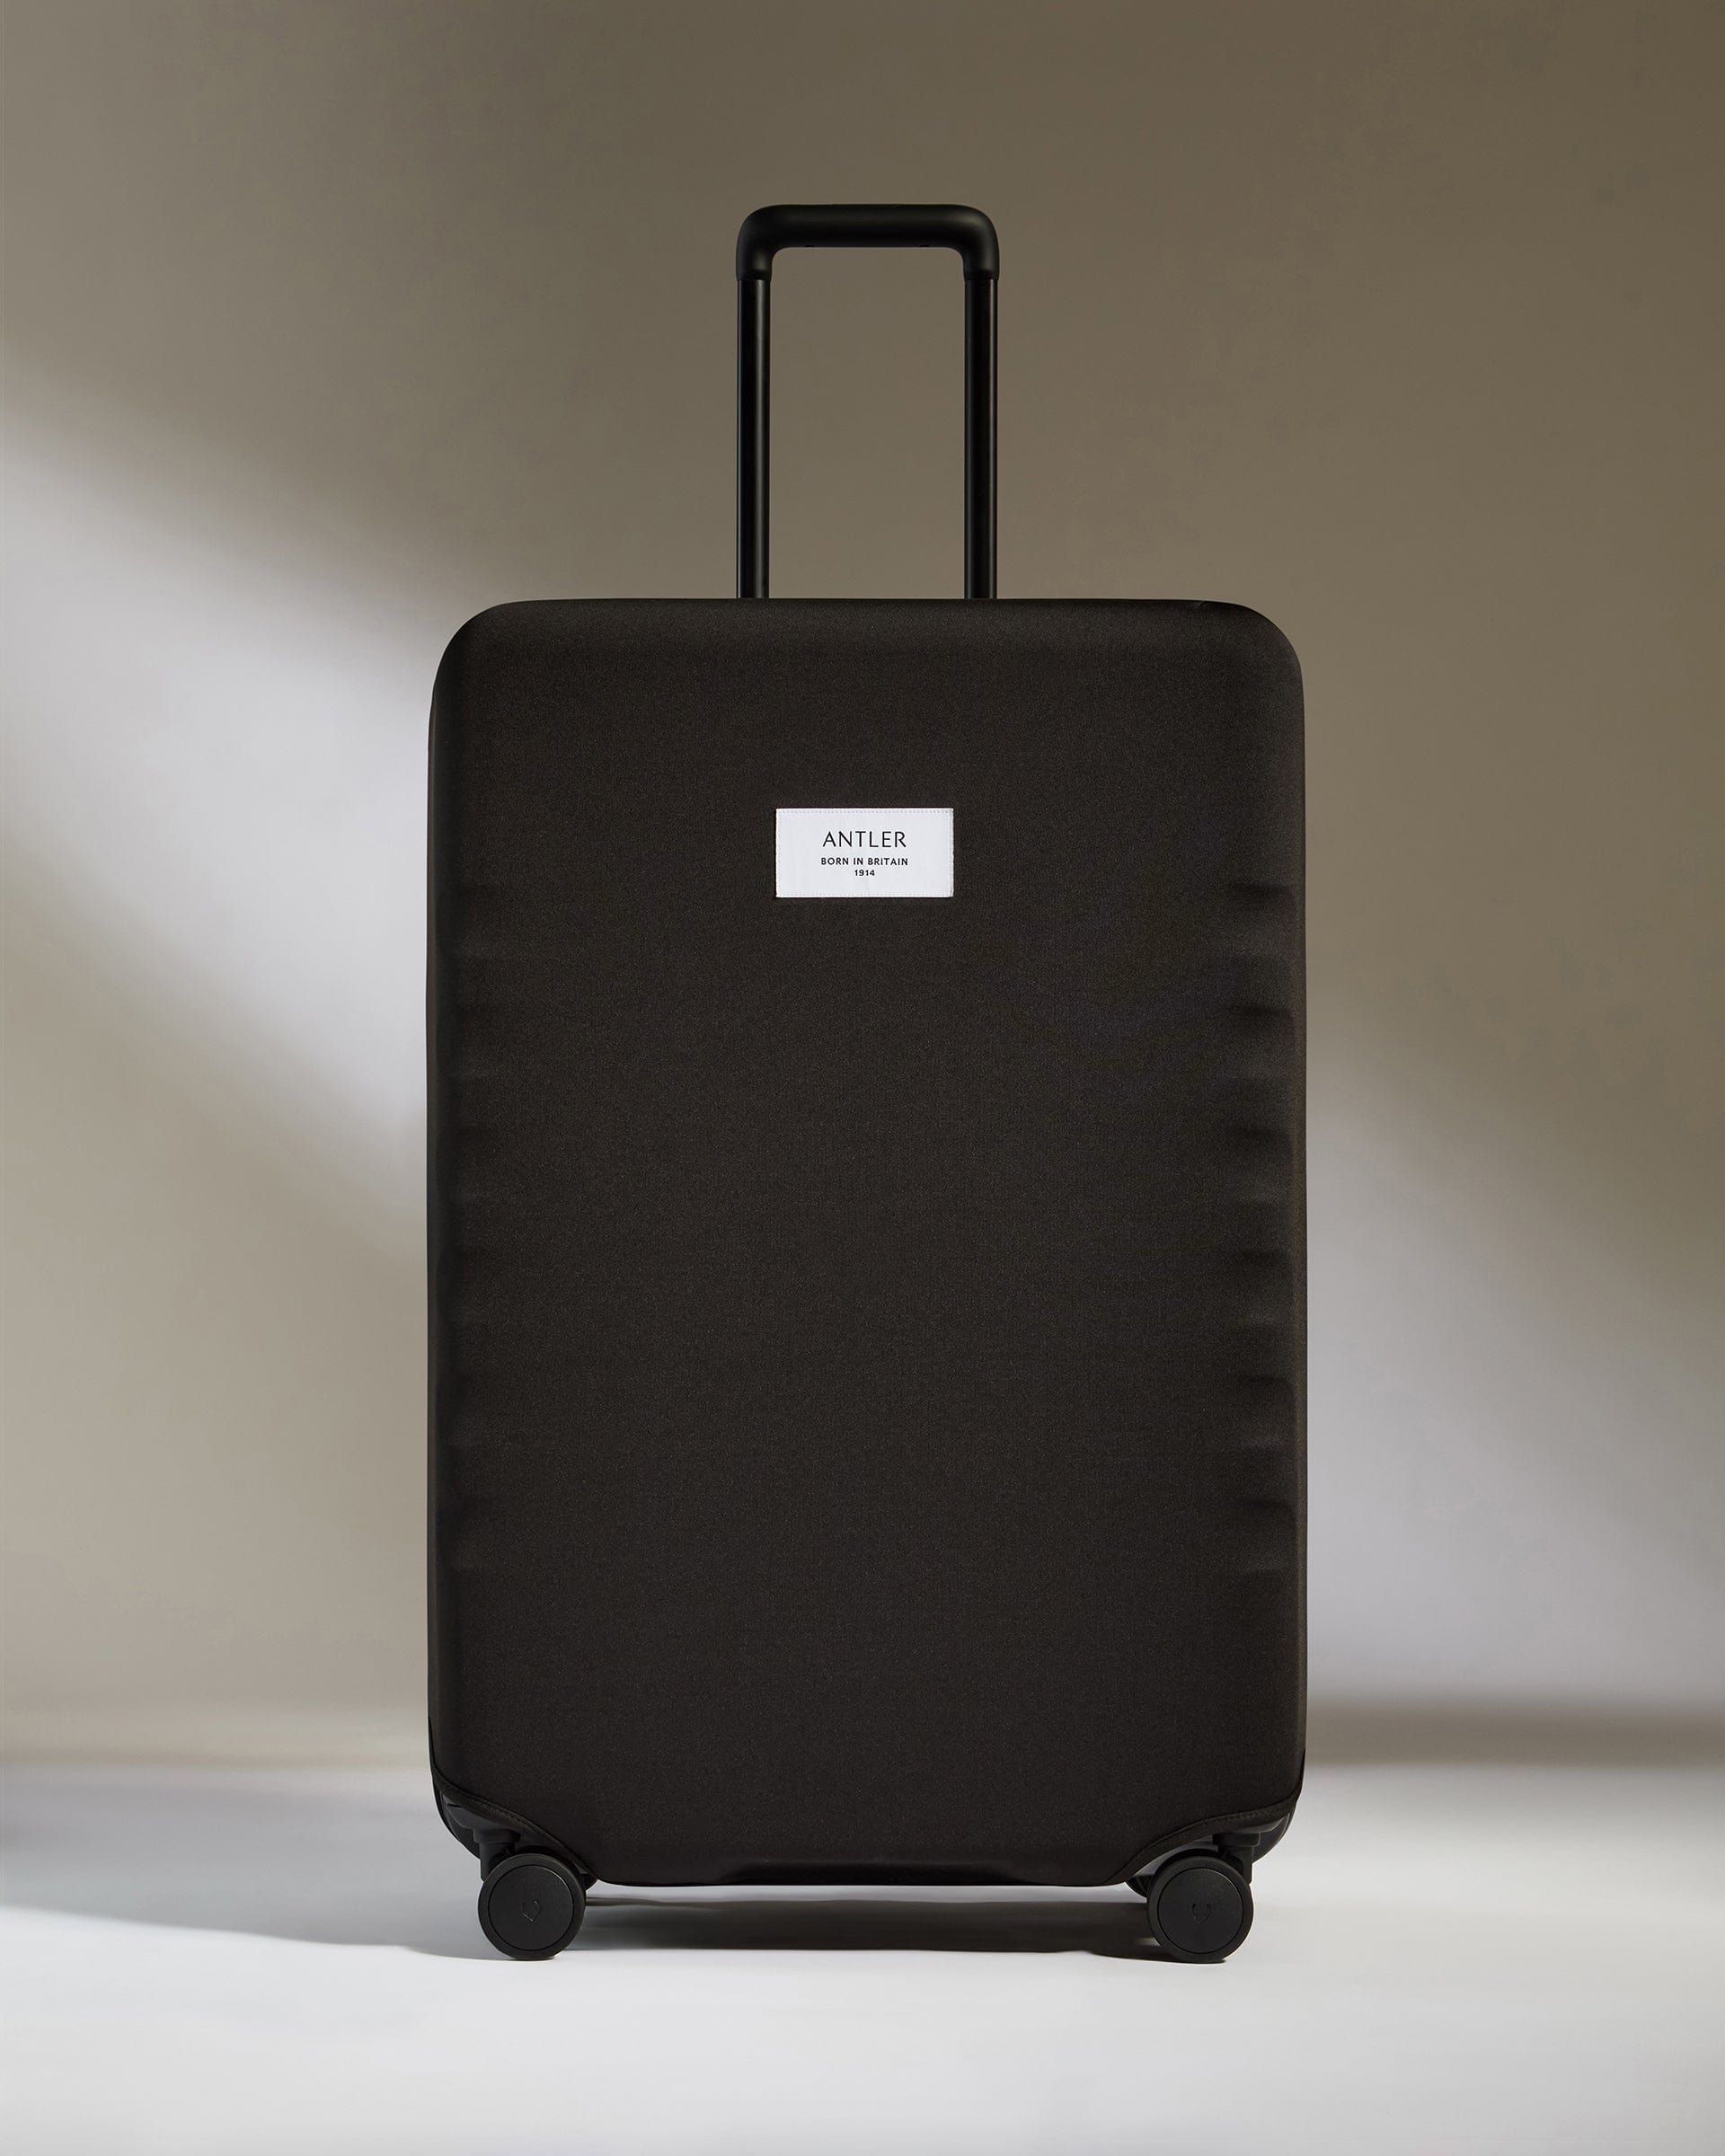 Antler Luggage -  Luggage Cover Large in Black - Travel Accessories